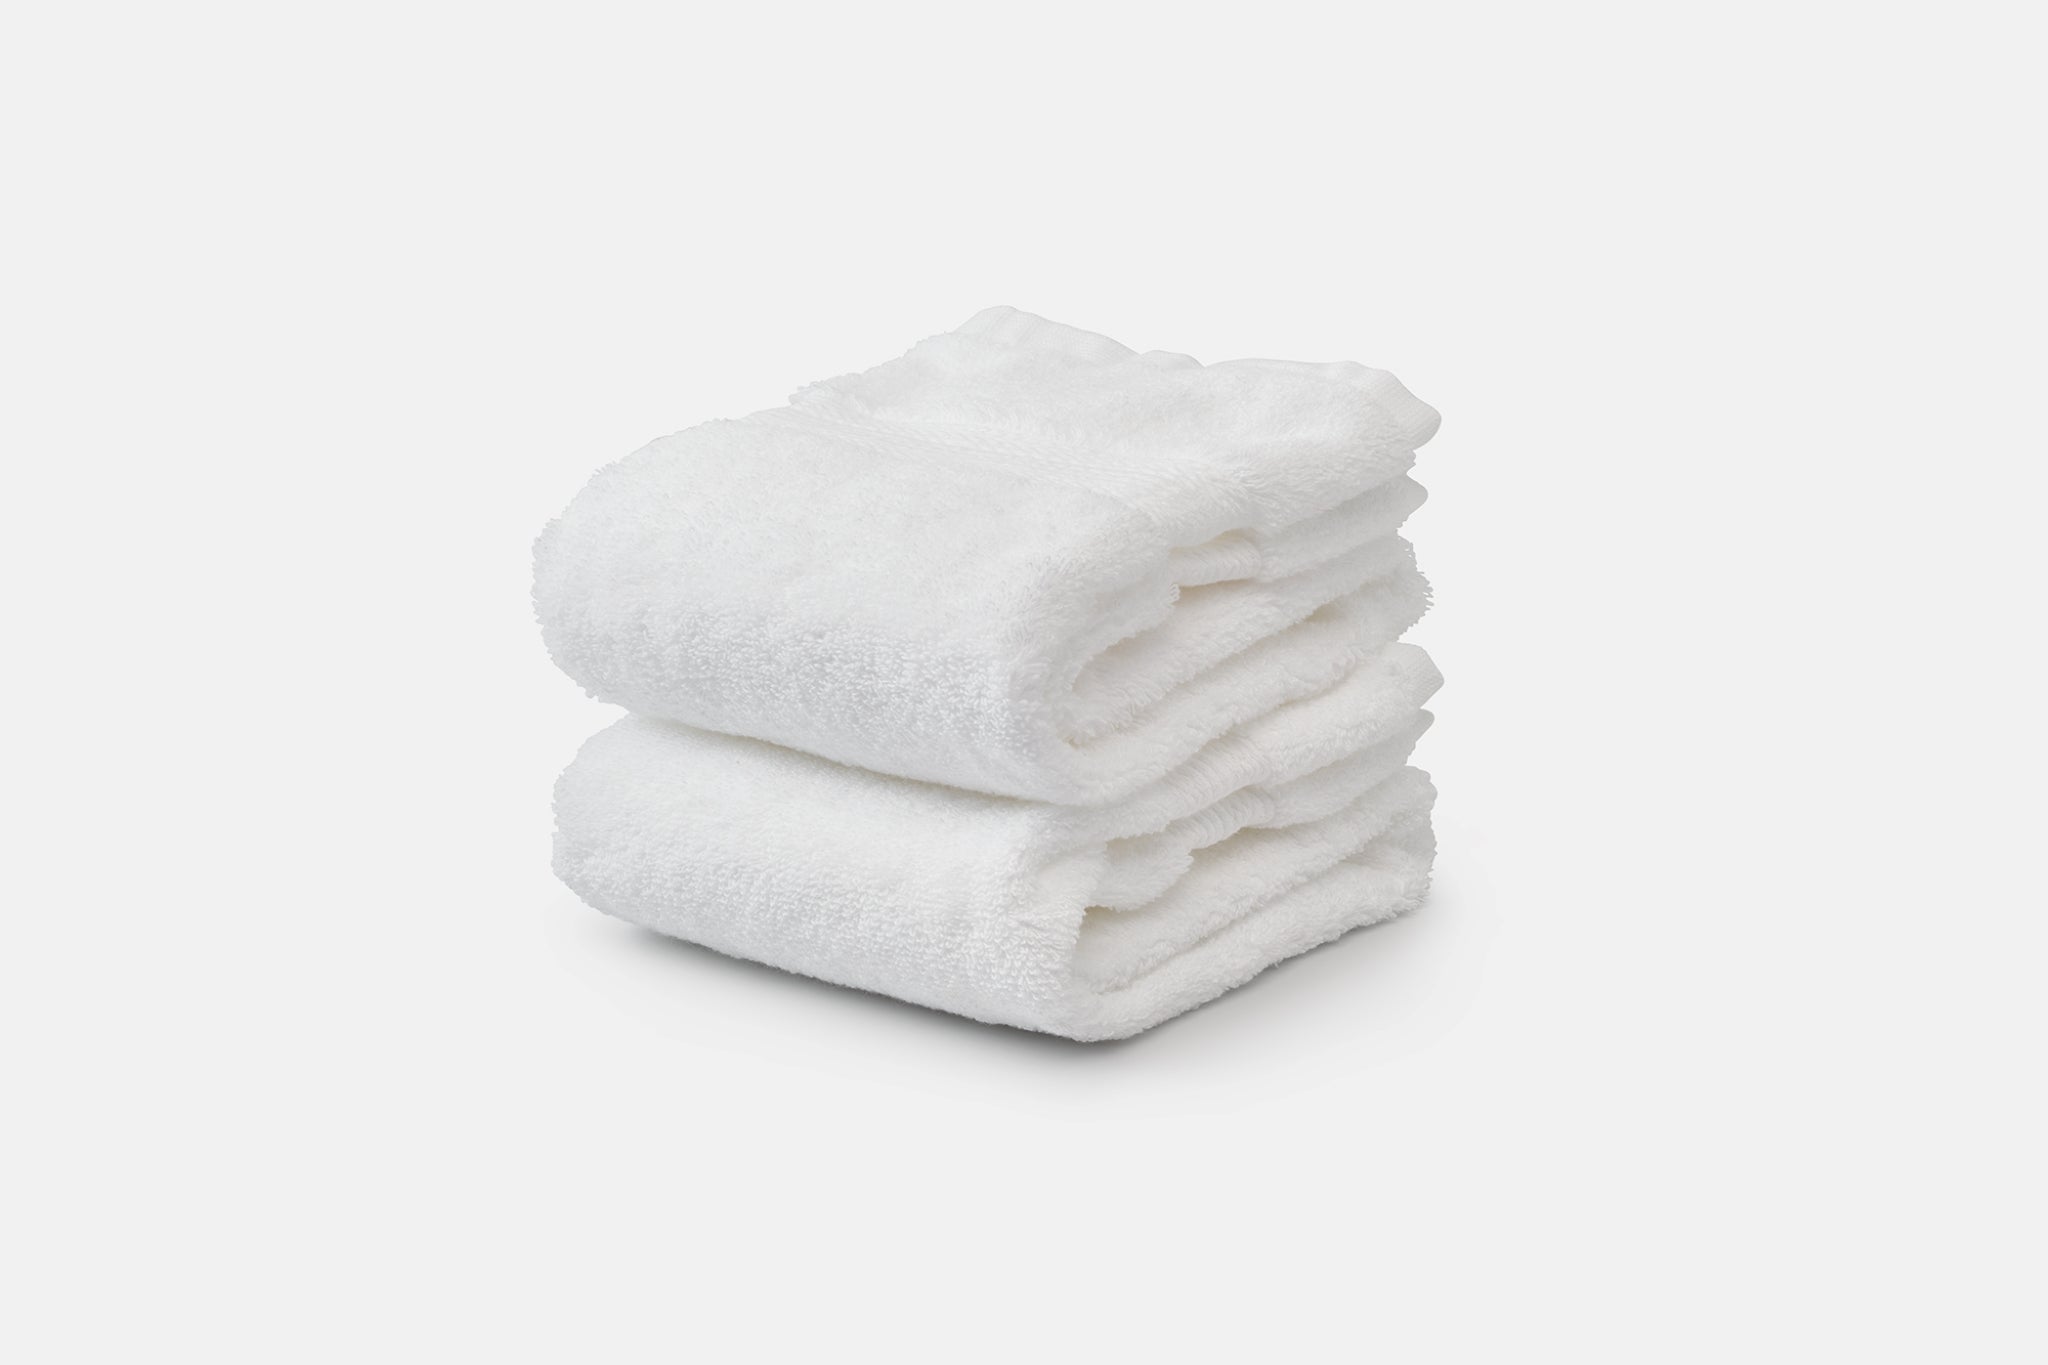 5 Types of Fabric Used for Constructing Bath Towels